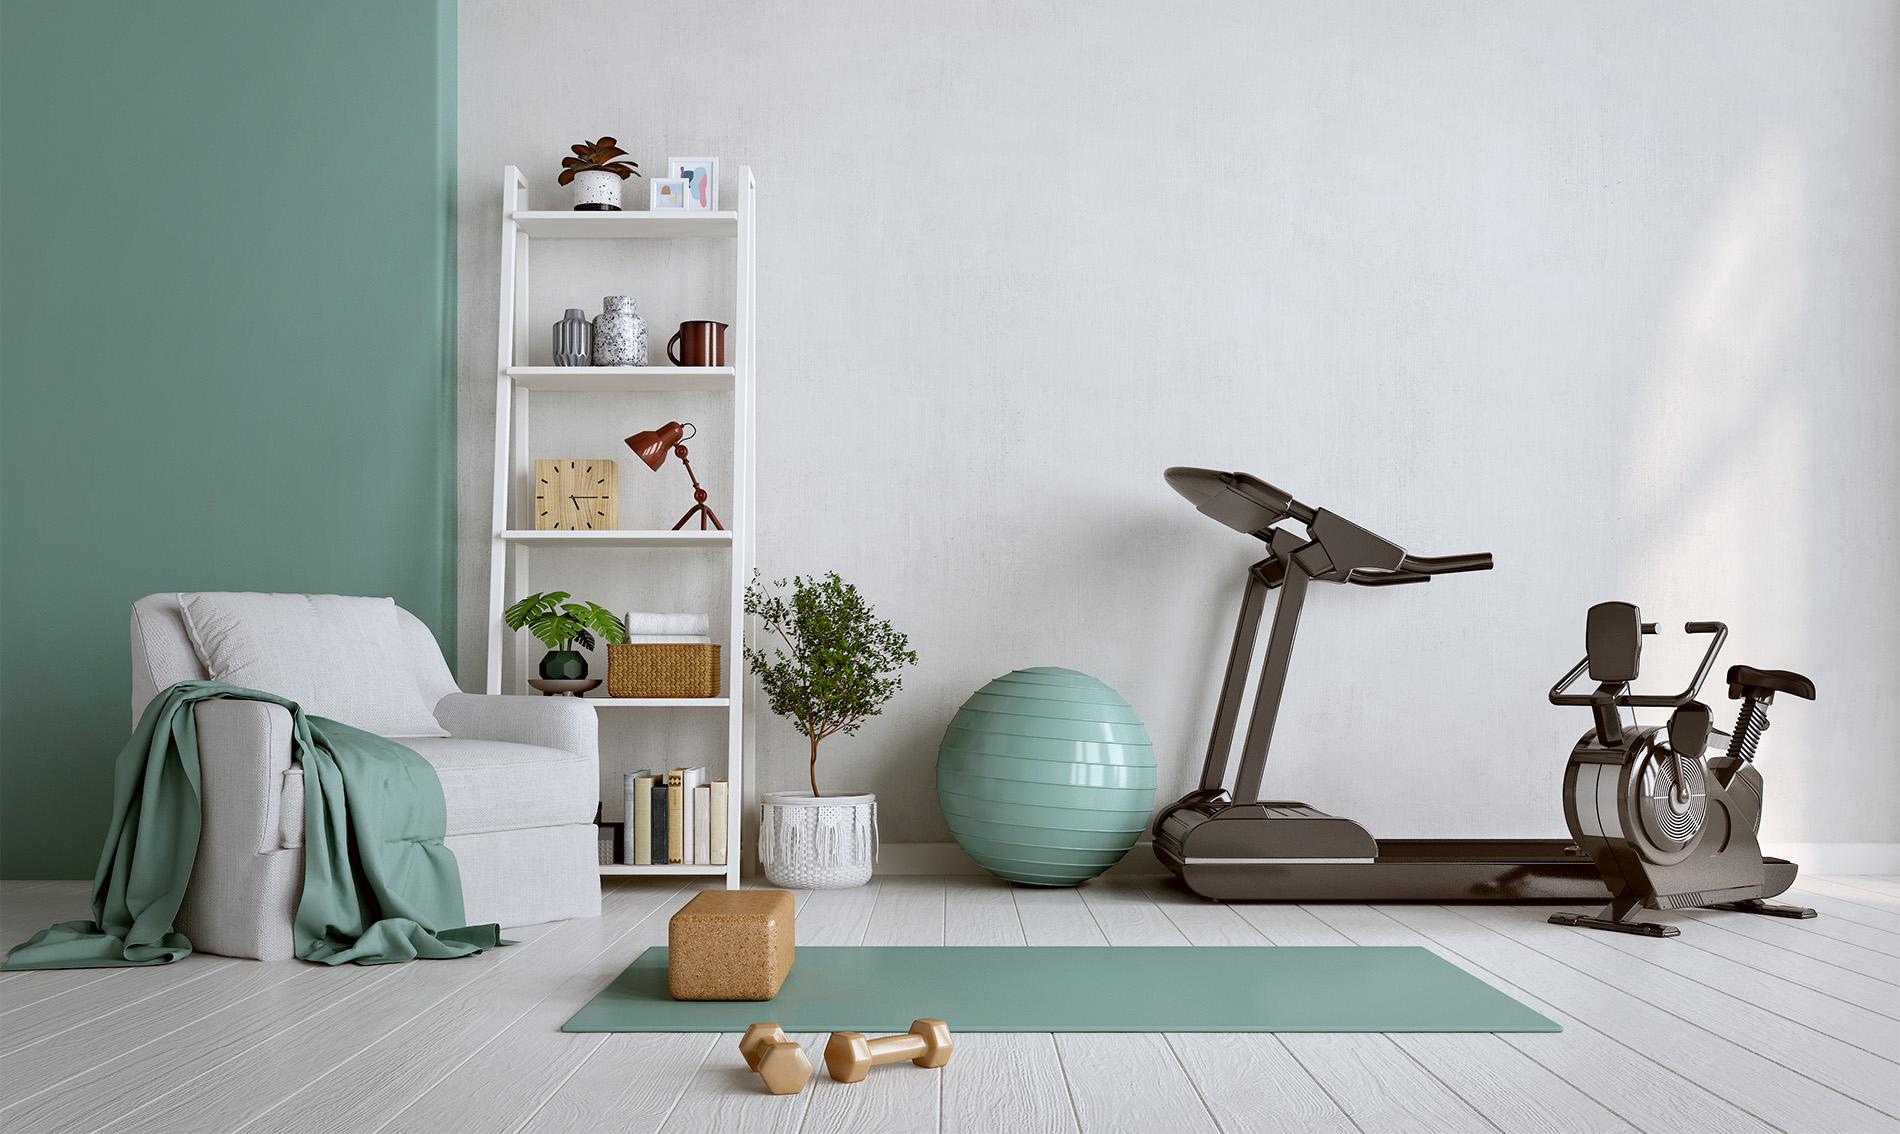 80 Yoga Studio Design Tips for the Home: Personal or Business